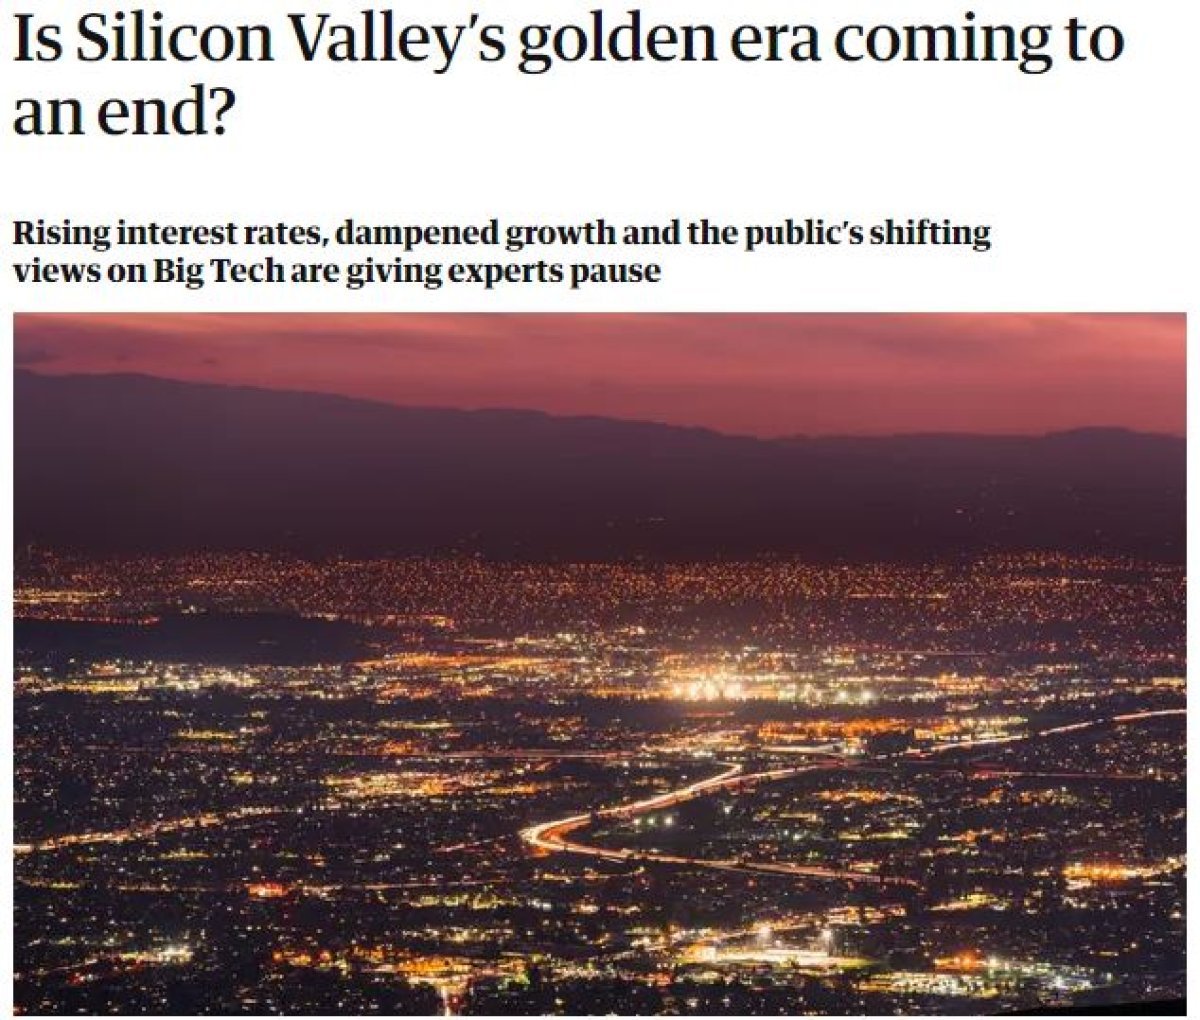 Guardian questions Silicon Valley's golden age #2